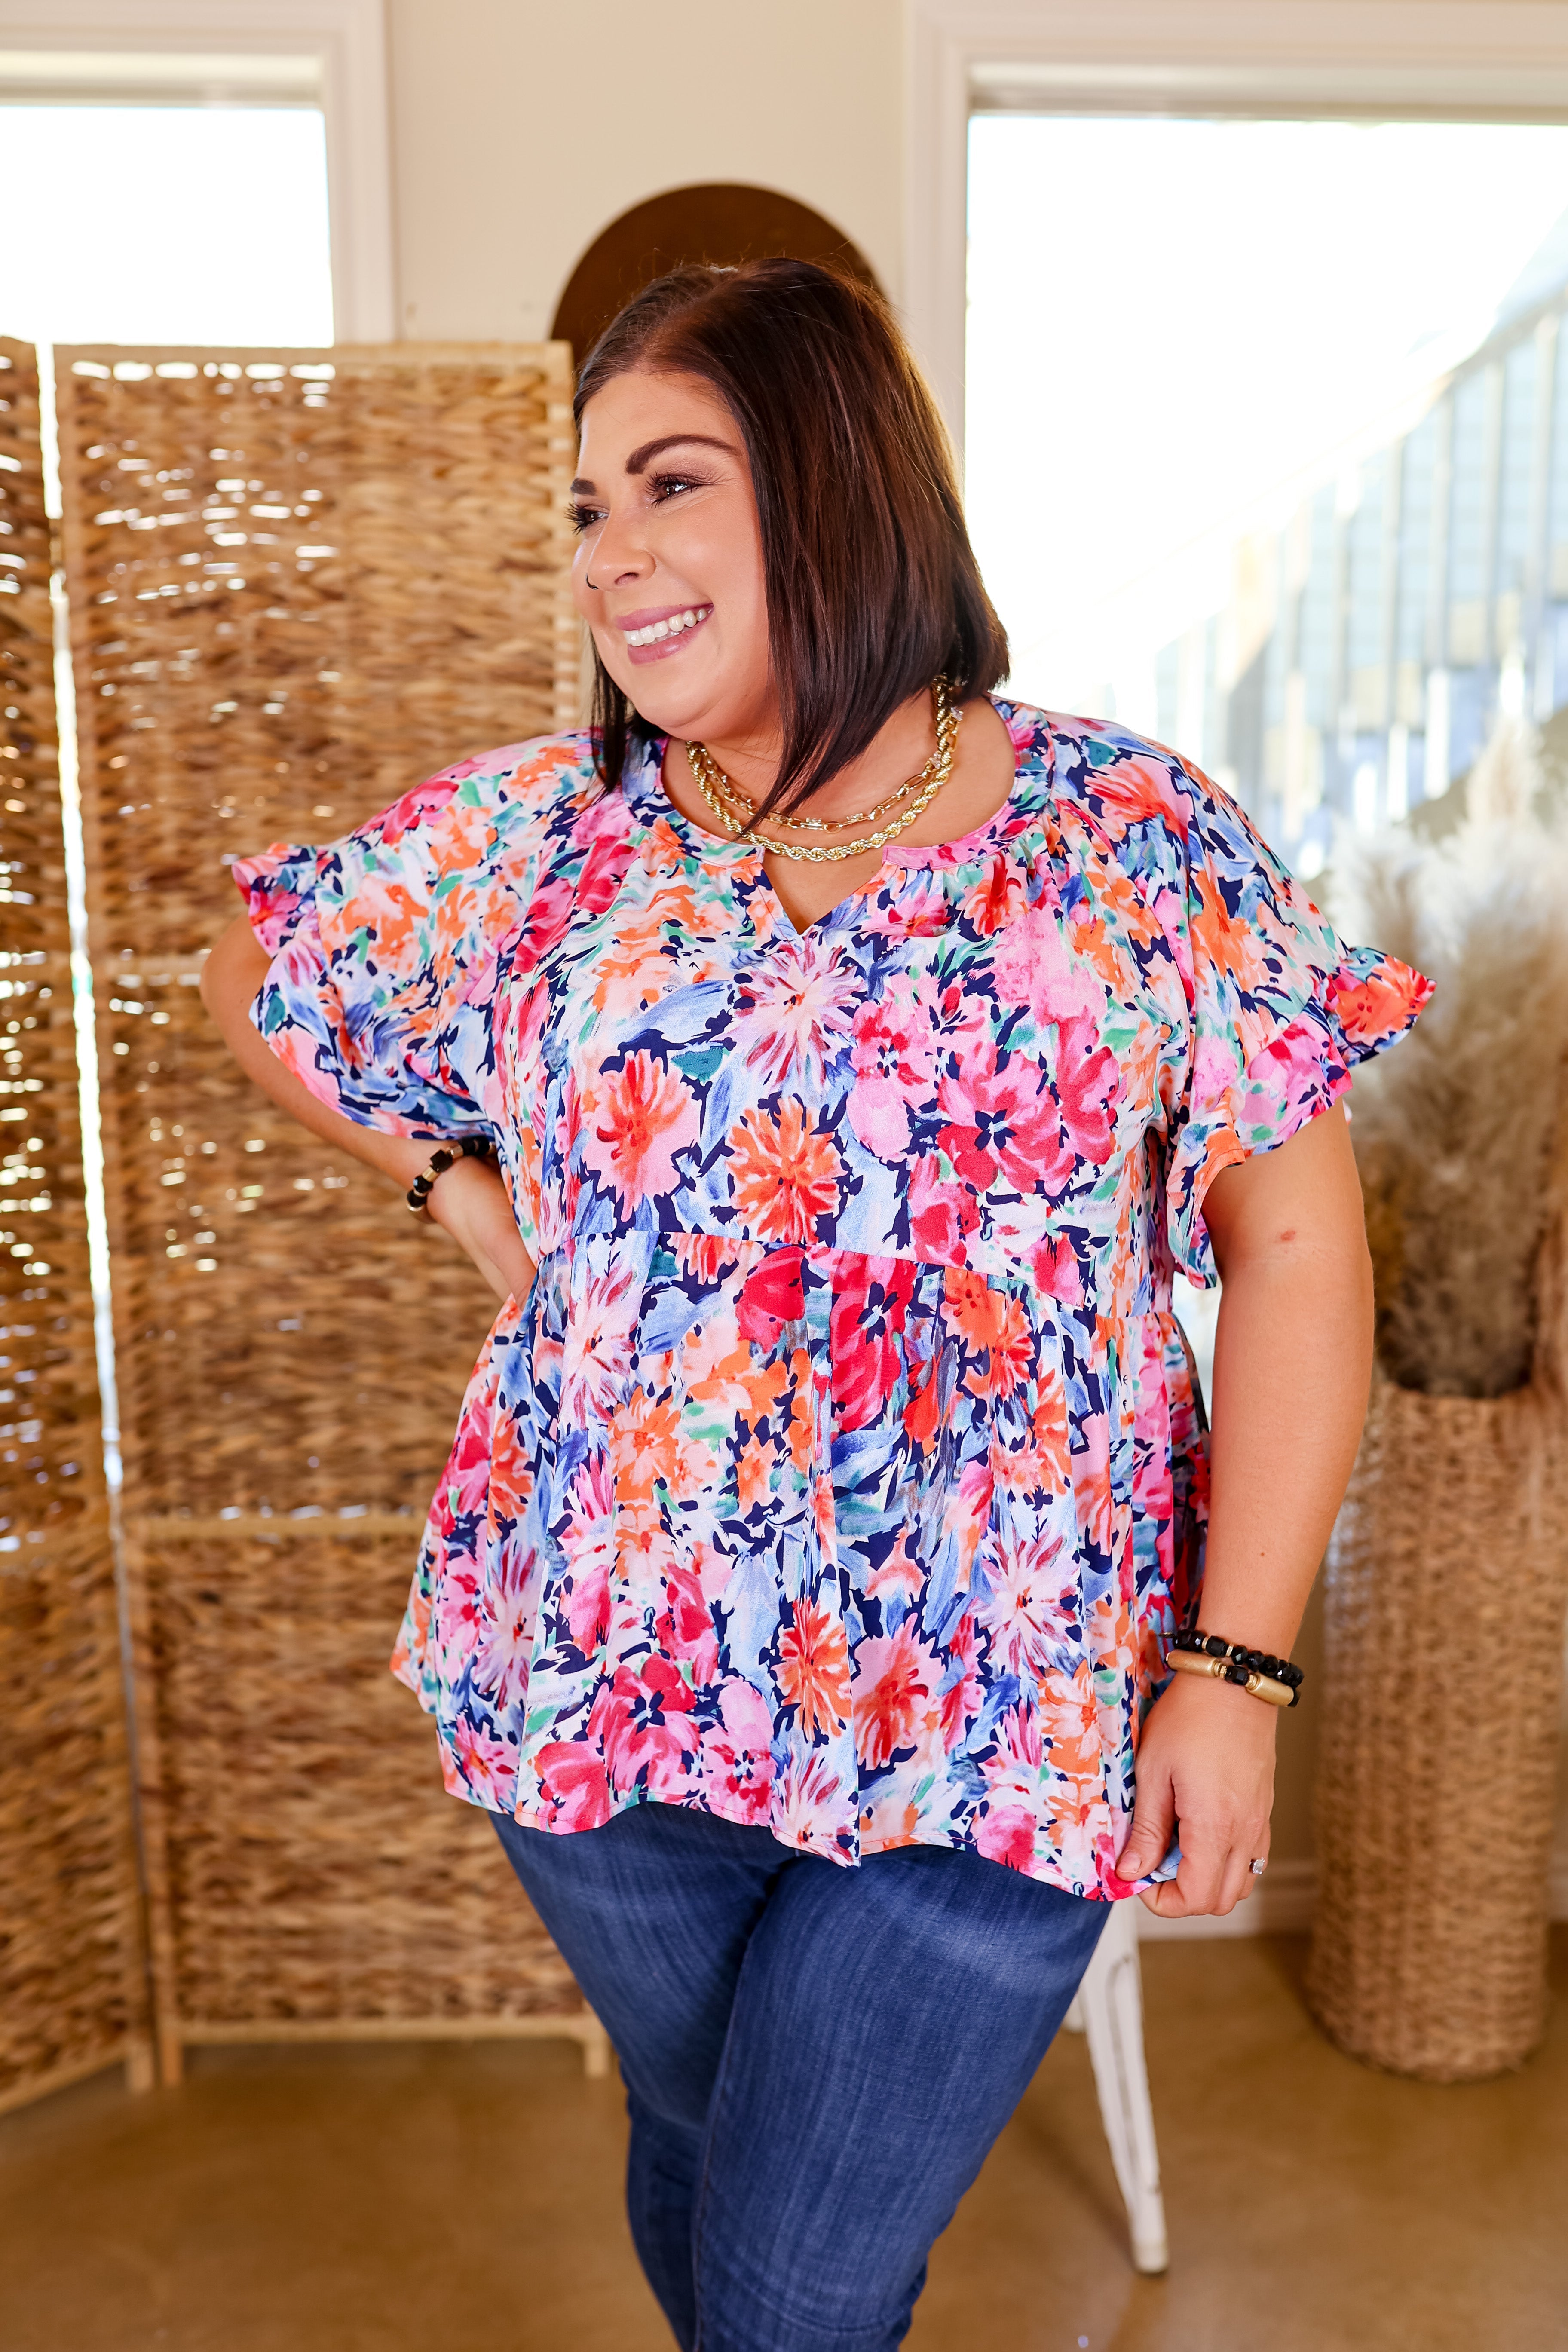 Spring Fever Floral Babydoll Top with Ruffle Short Sleeves in Pink and Blue Mix - Giddy Up Glamour Boutique